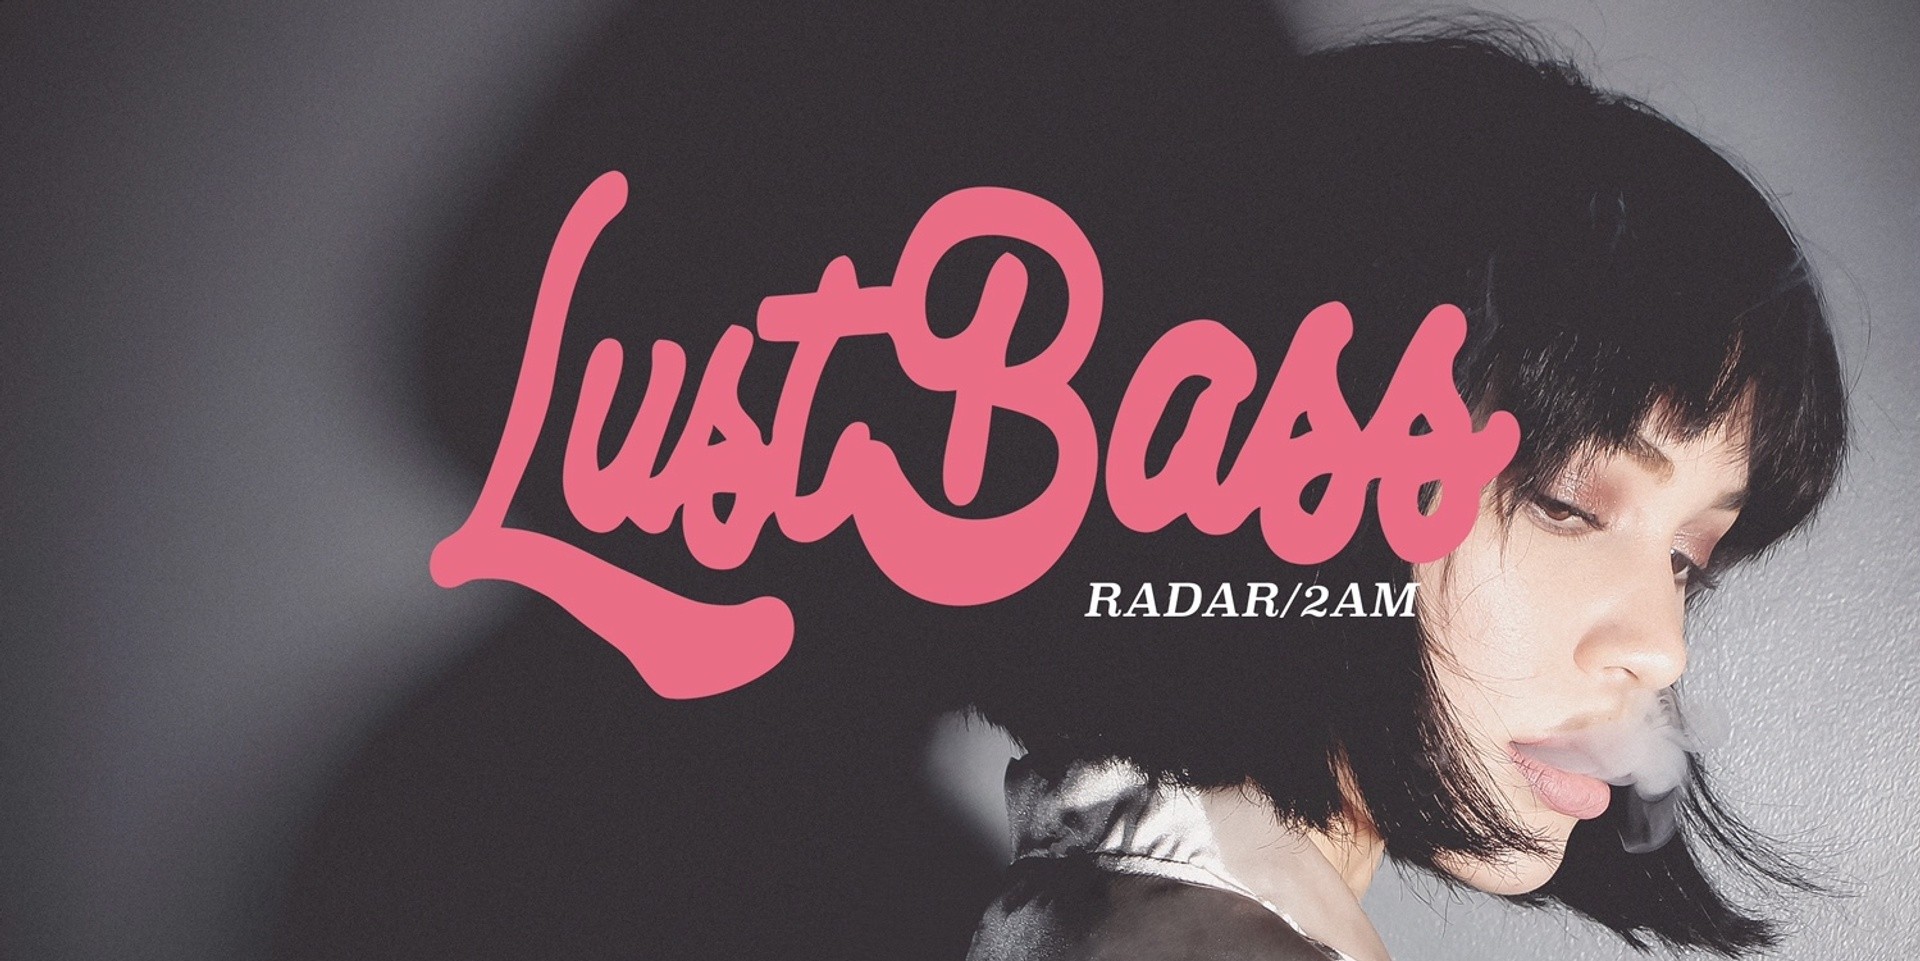 LISTEN: Jess Connelly celebrates her birthday with LUSTBASS produced track 'Radar/2am'